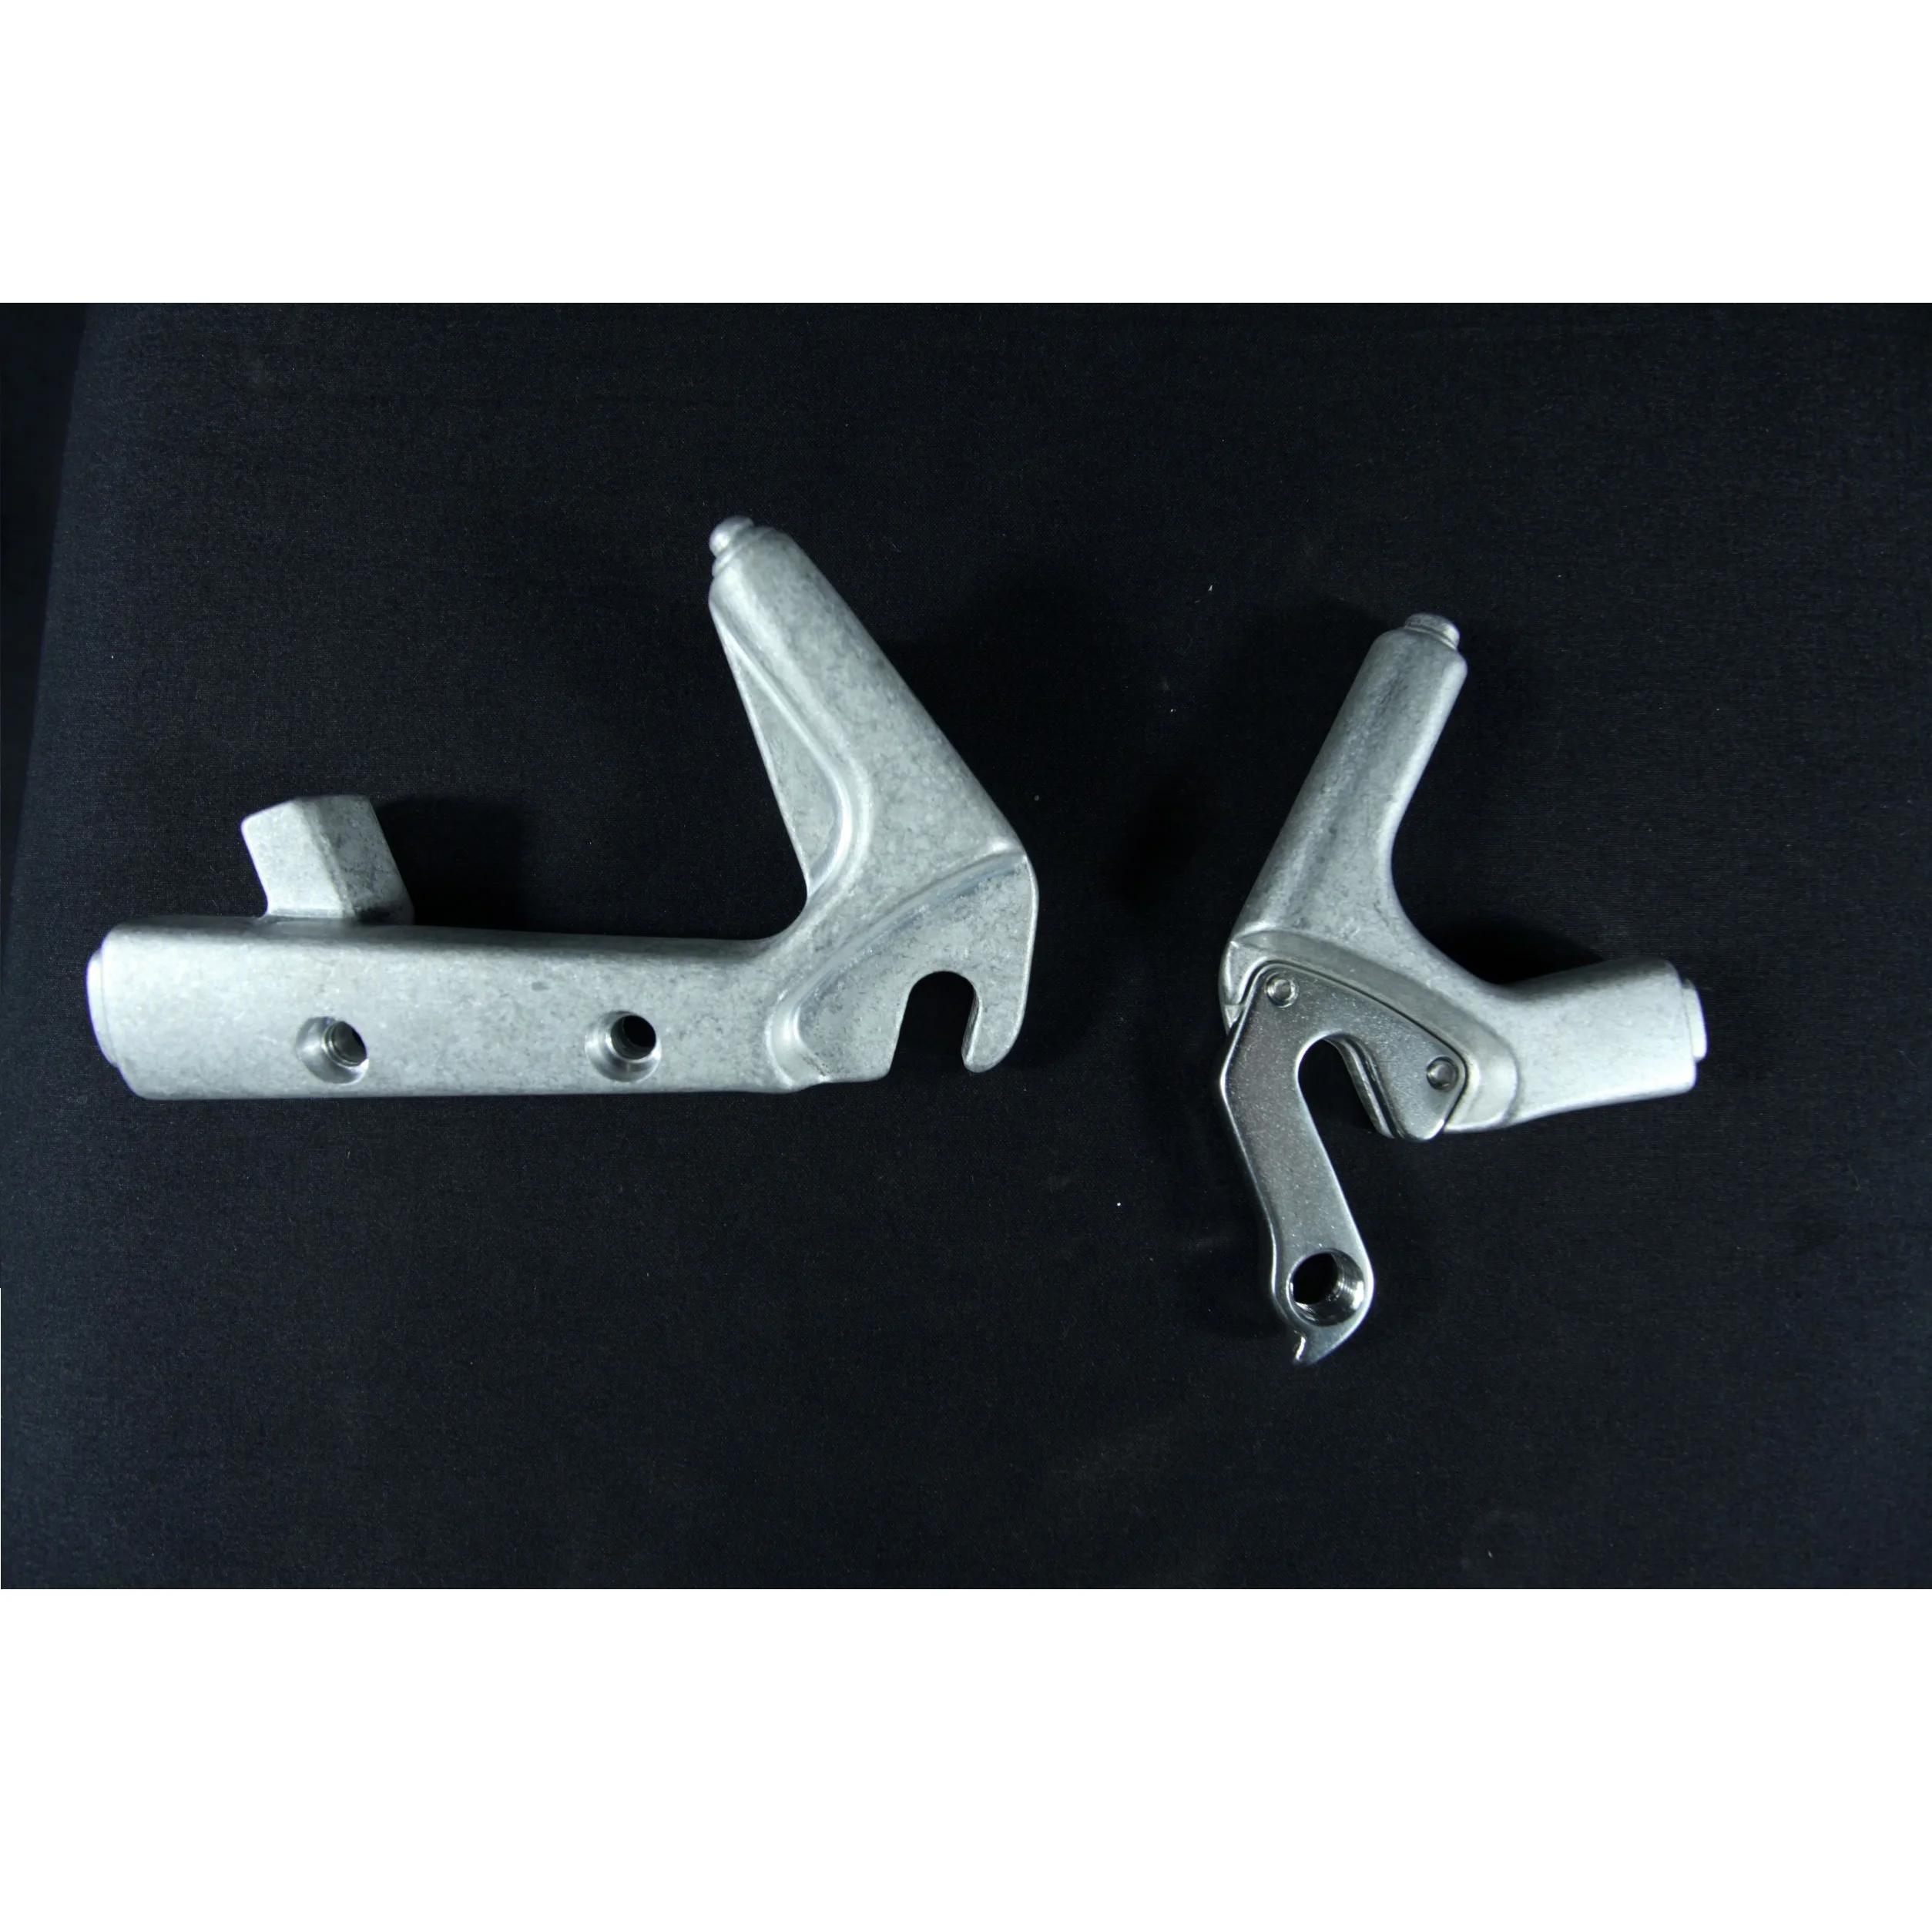 Source New Type Bicycle Rear Dropouts With Kickstand Hole Hot Sale Bike Parts Forge Aluminum Mountain Bike Spare Parts on m.alibaba